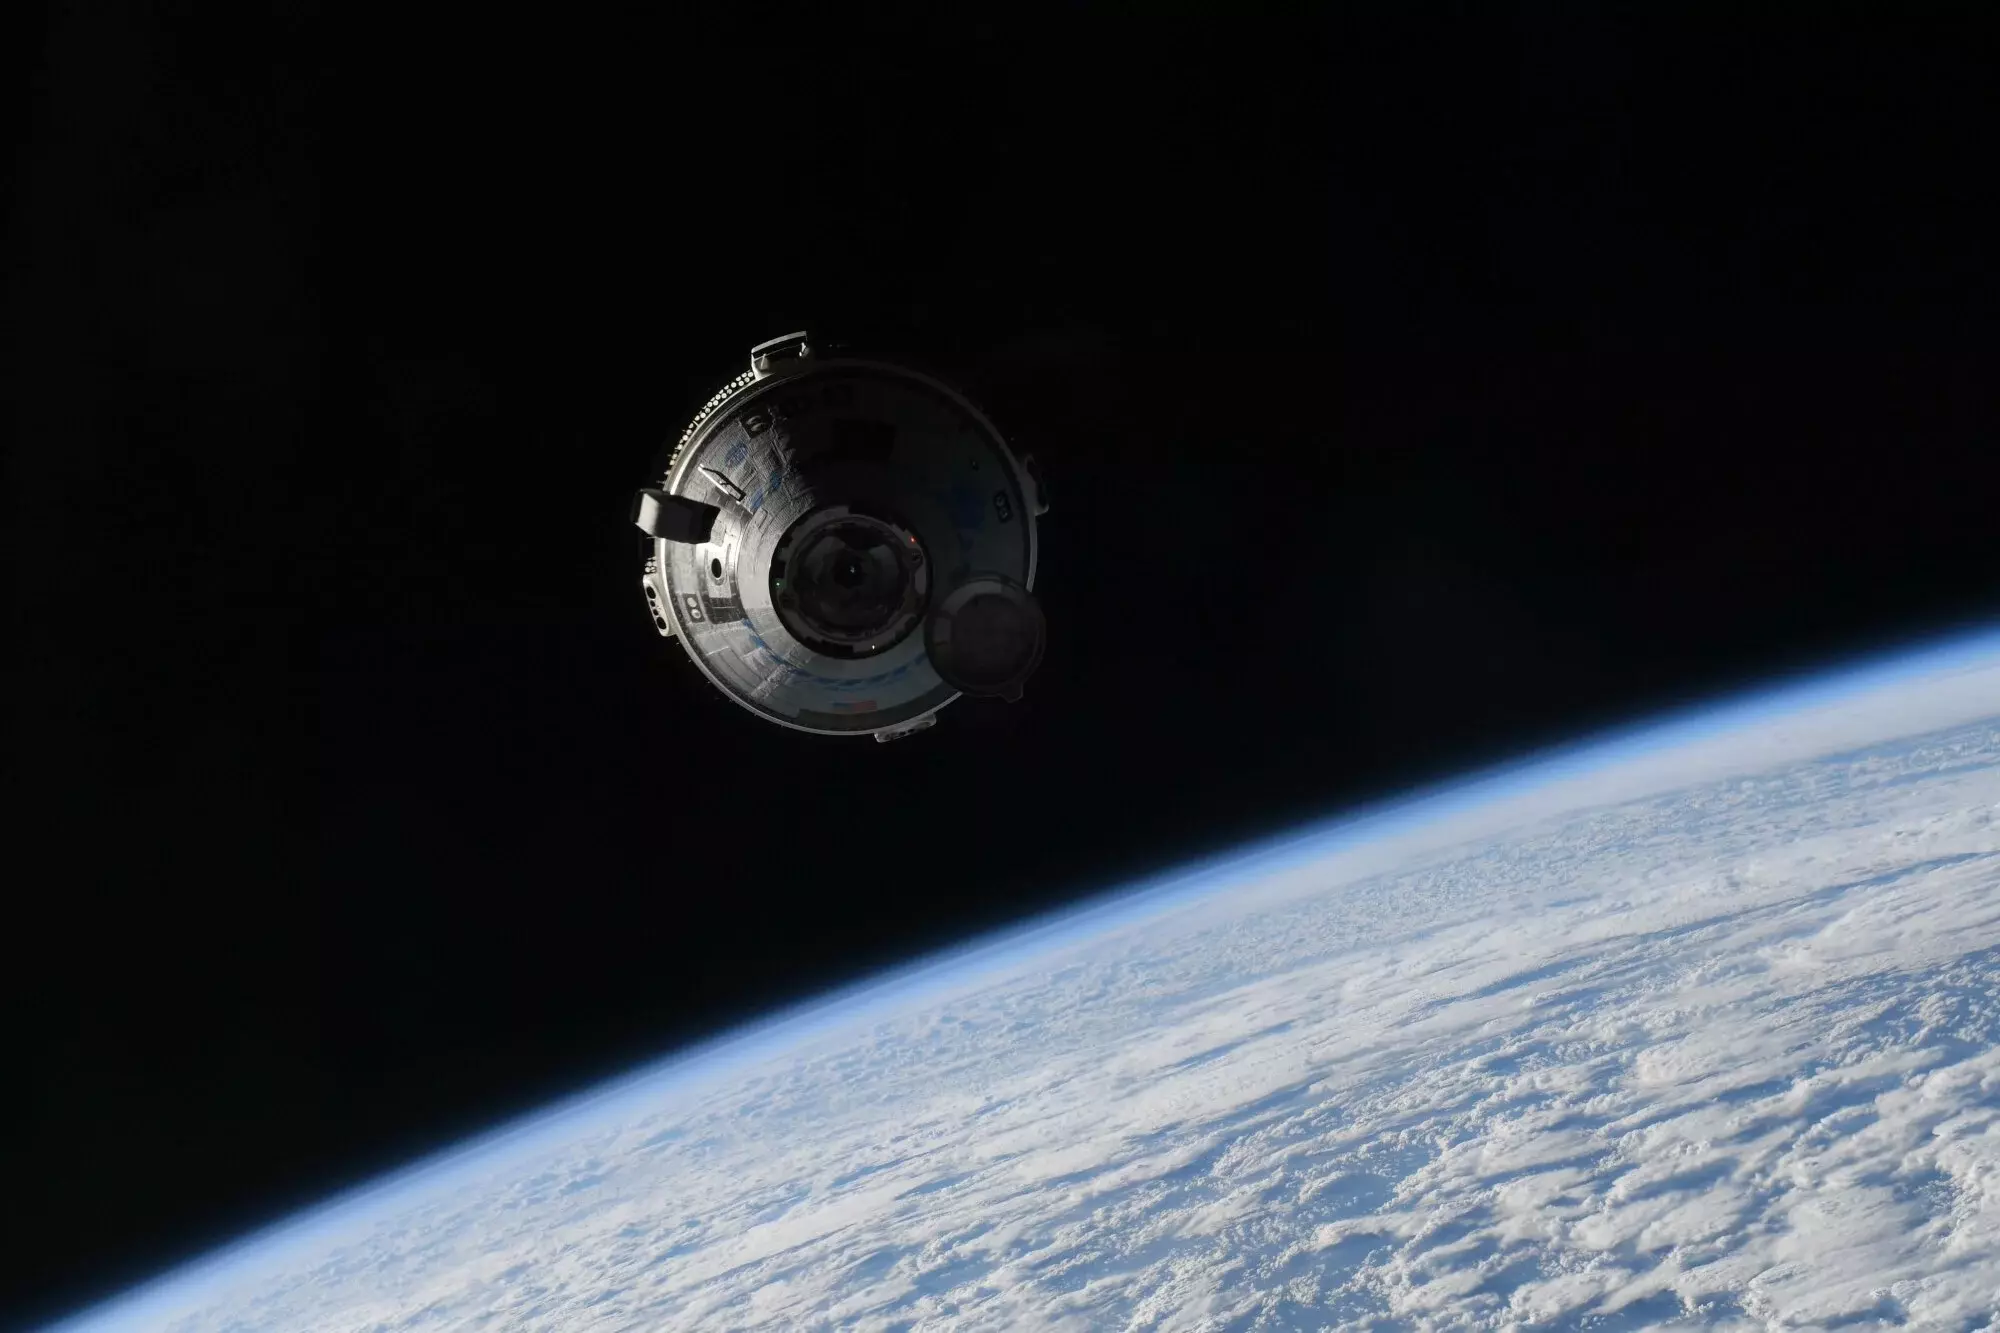 Starliner approaching the International Space Station